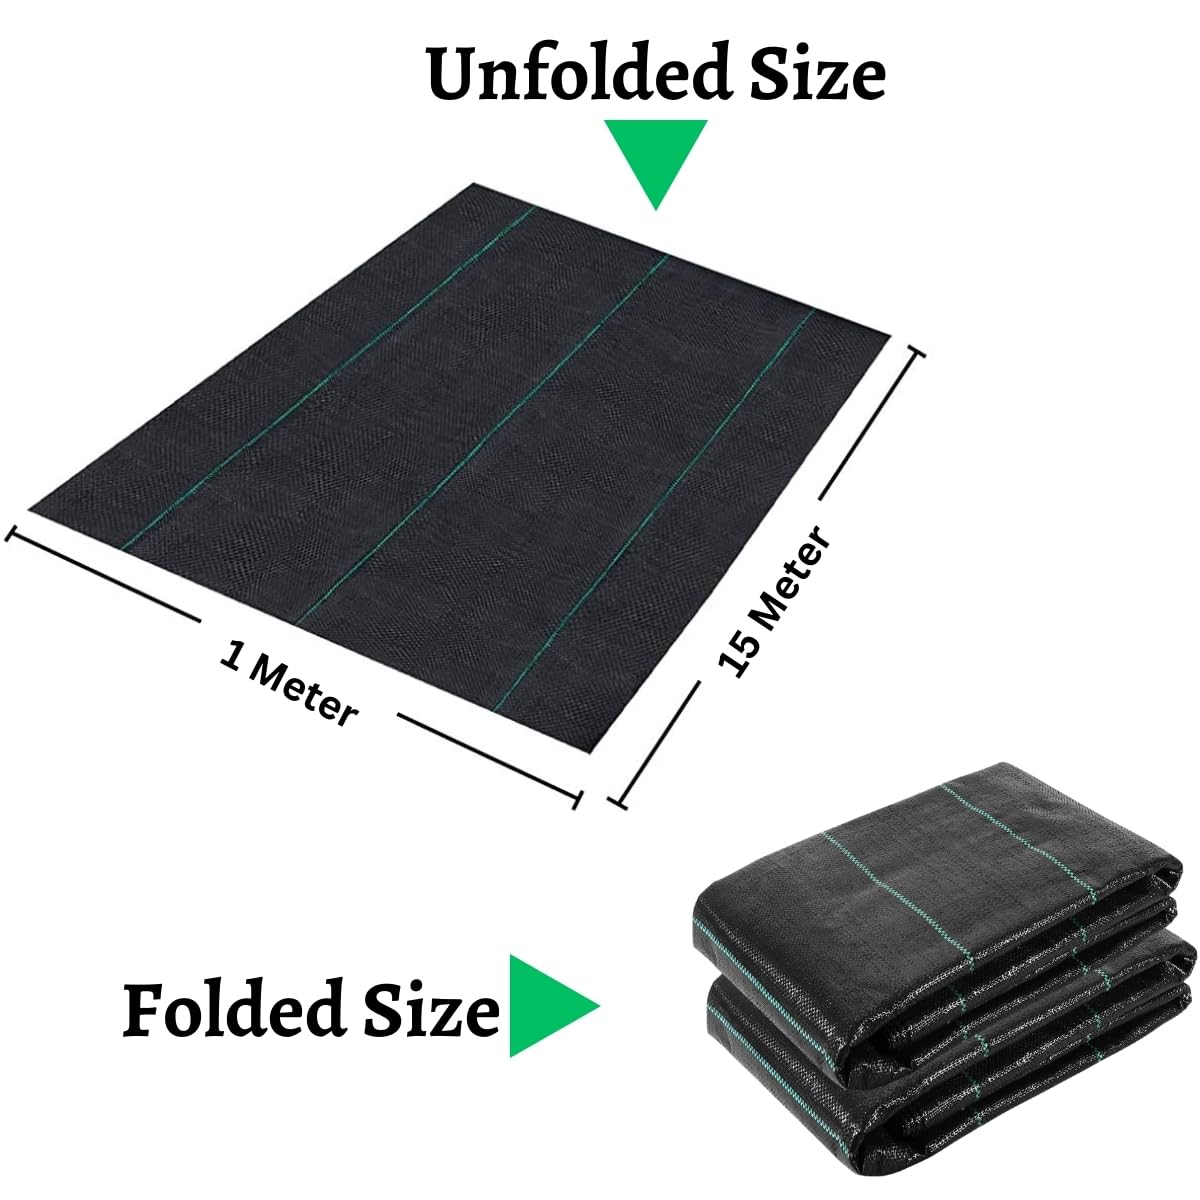 Singhal Premium Garden Weed Control Barrier Sheet Mat 1 Meter x 15 Meter, Landscape Fabric 110 GSM Heavy Duty Weed Block Gardening Mat for Gardens, Agriculture, Outdoor Projects (Black)